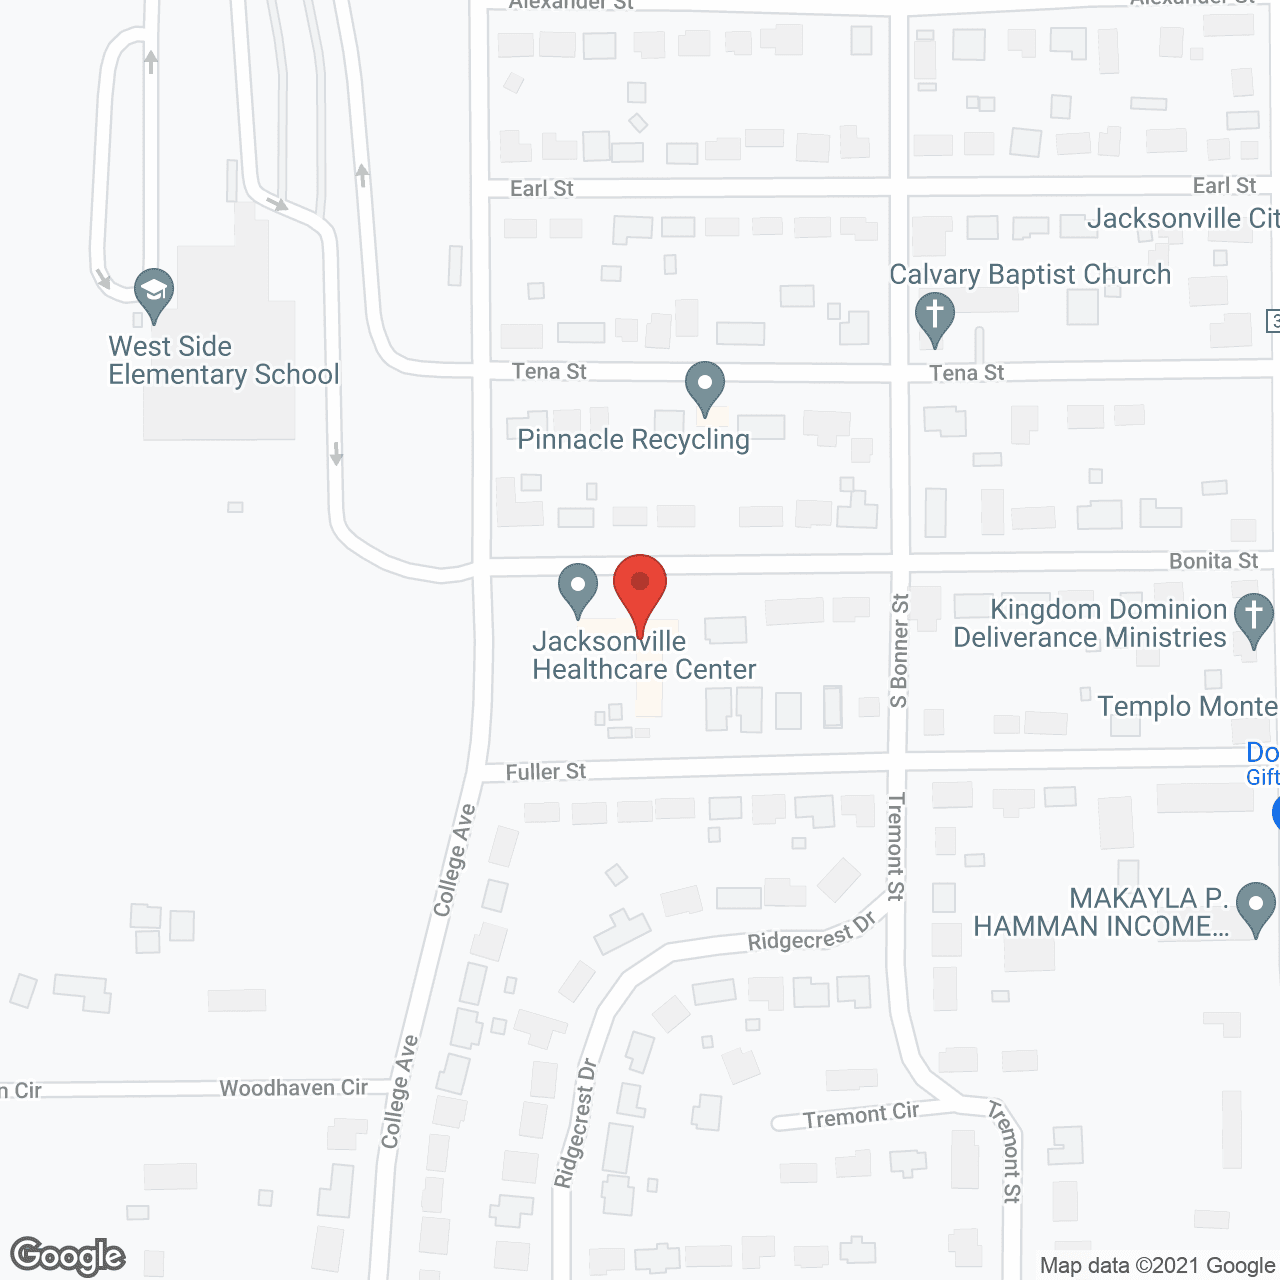 Jacksonville Health Care Ctr in google map